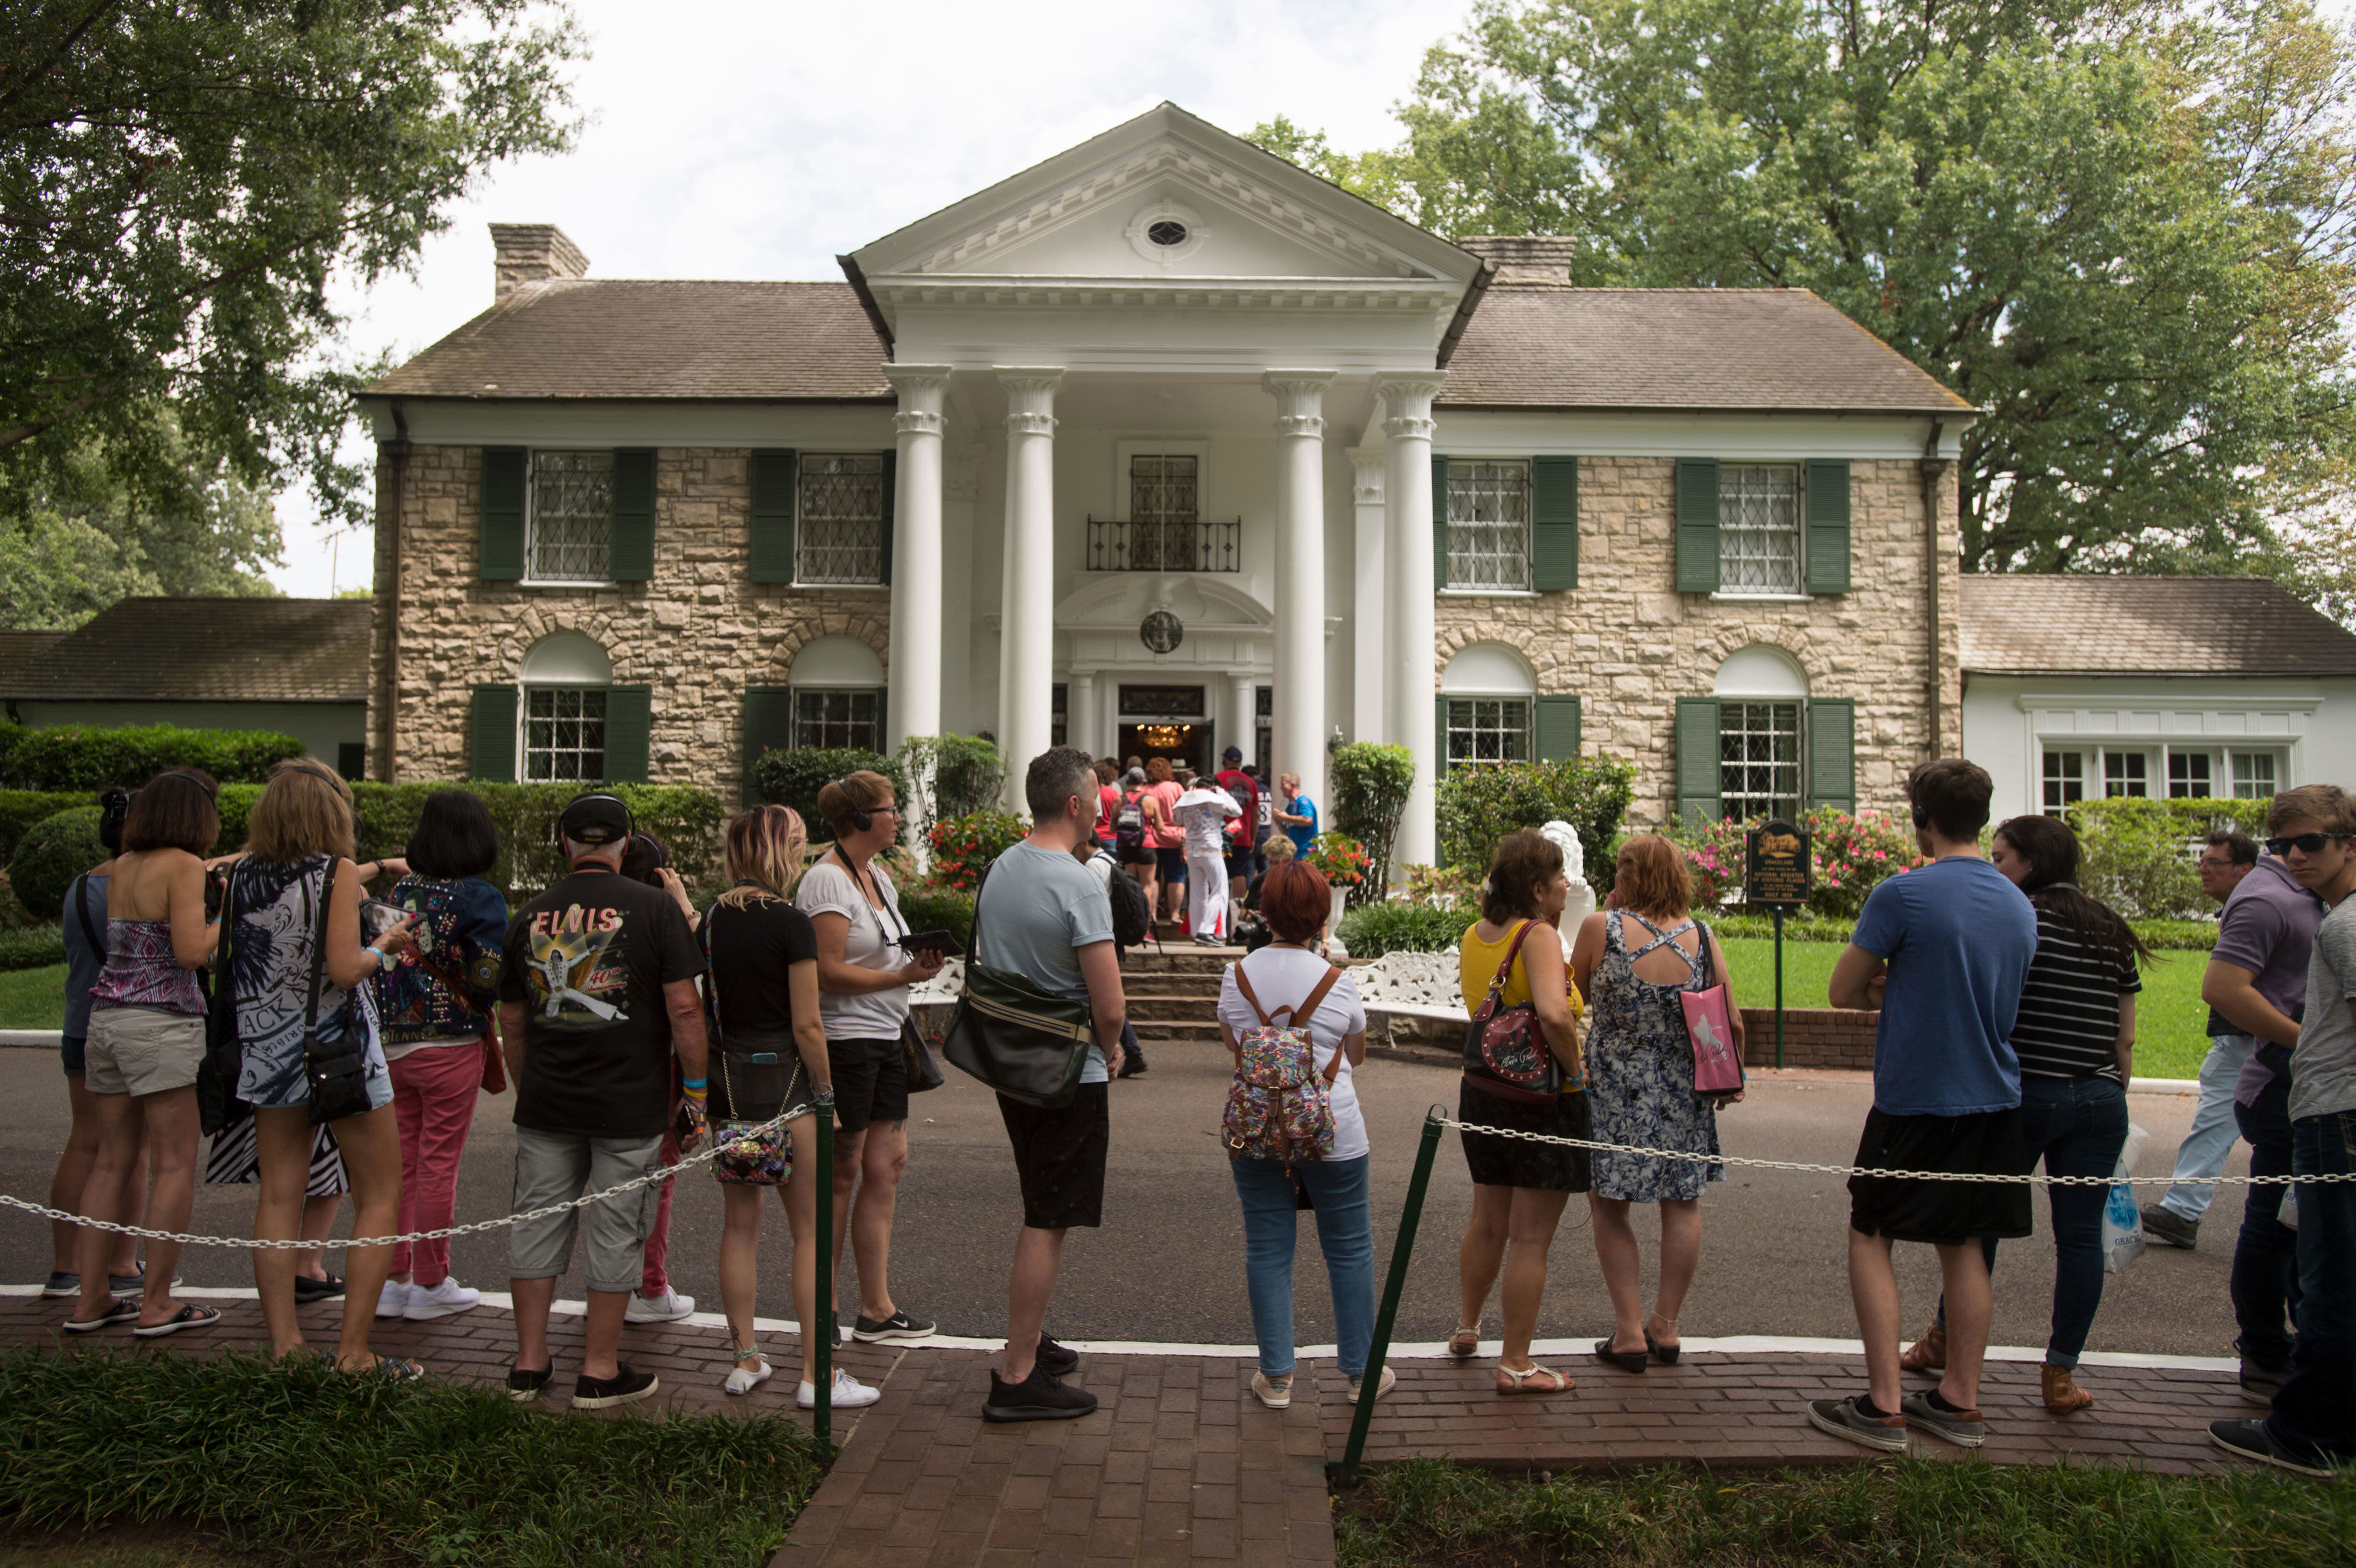 Failed Graceland sale by a mystery entity highlights attempts to take assets of older or dead people